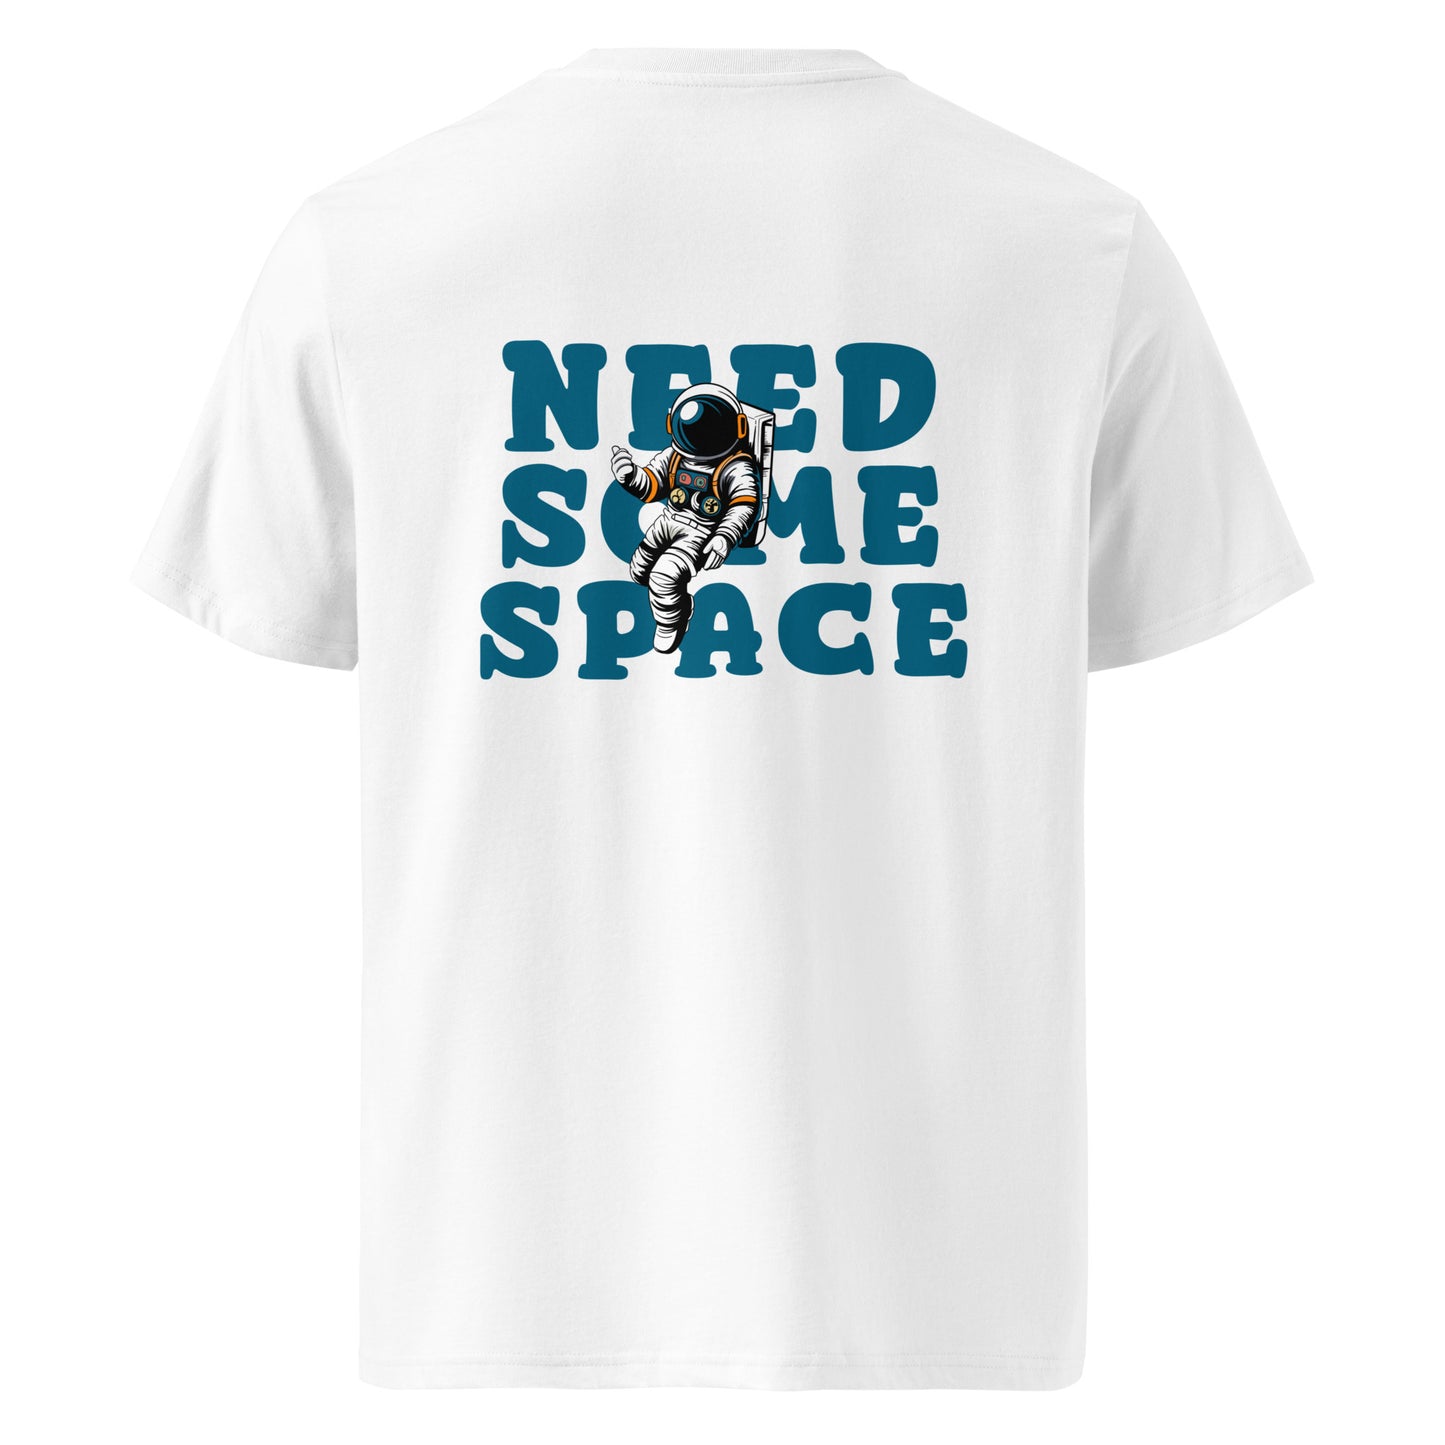 Need Some Space (Back) - Unisex Organic Cotton T-shirt